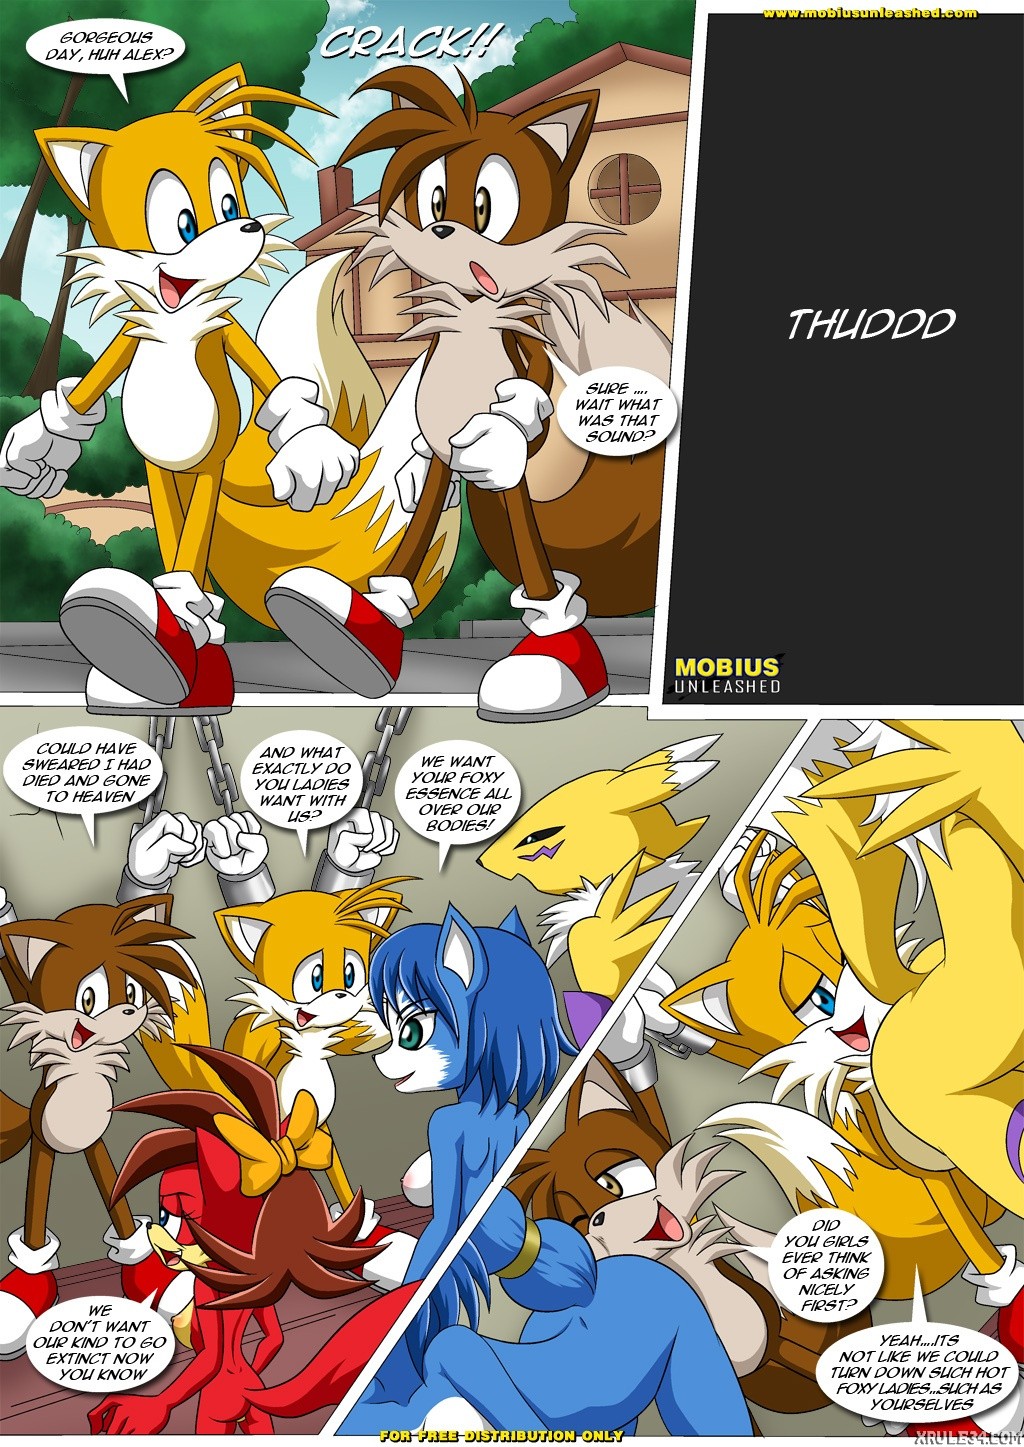 Foxxxes^2 - 2 Much Tail porn comic picture 2